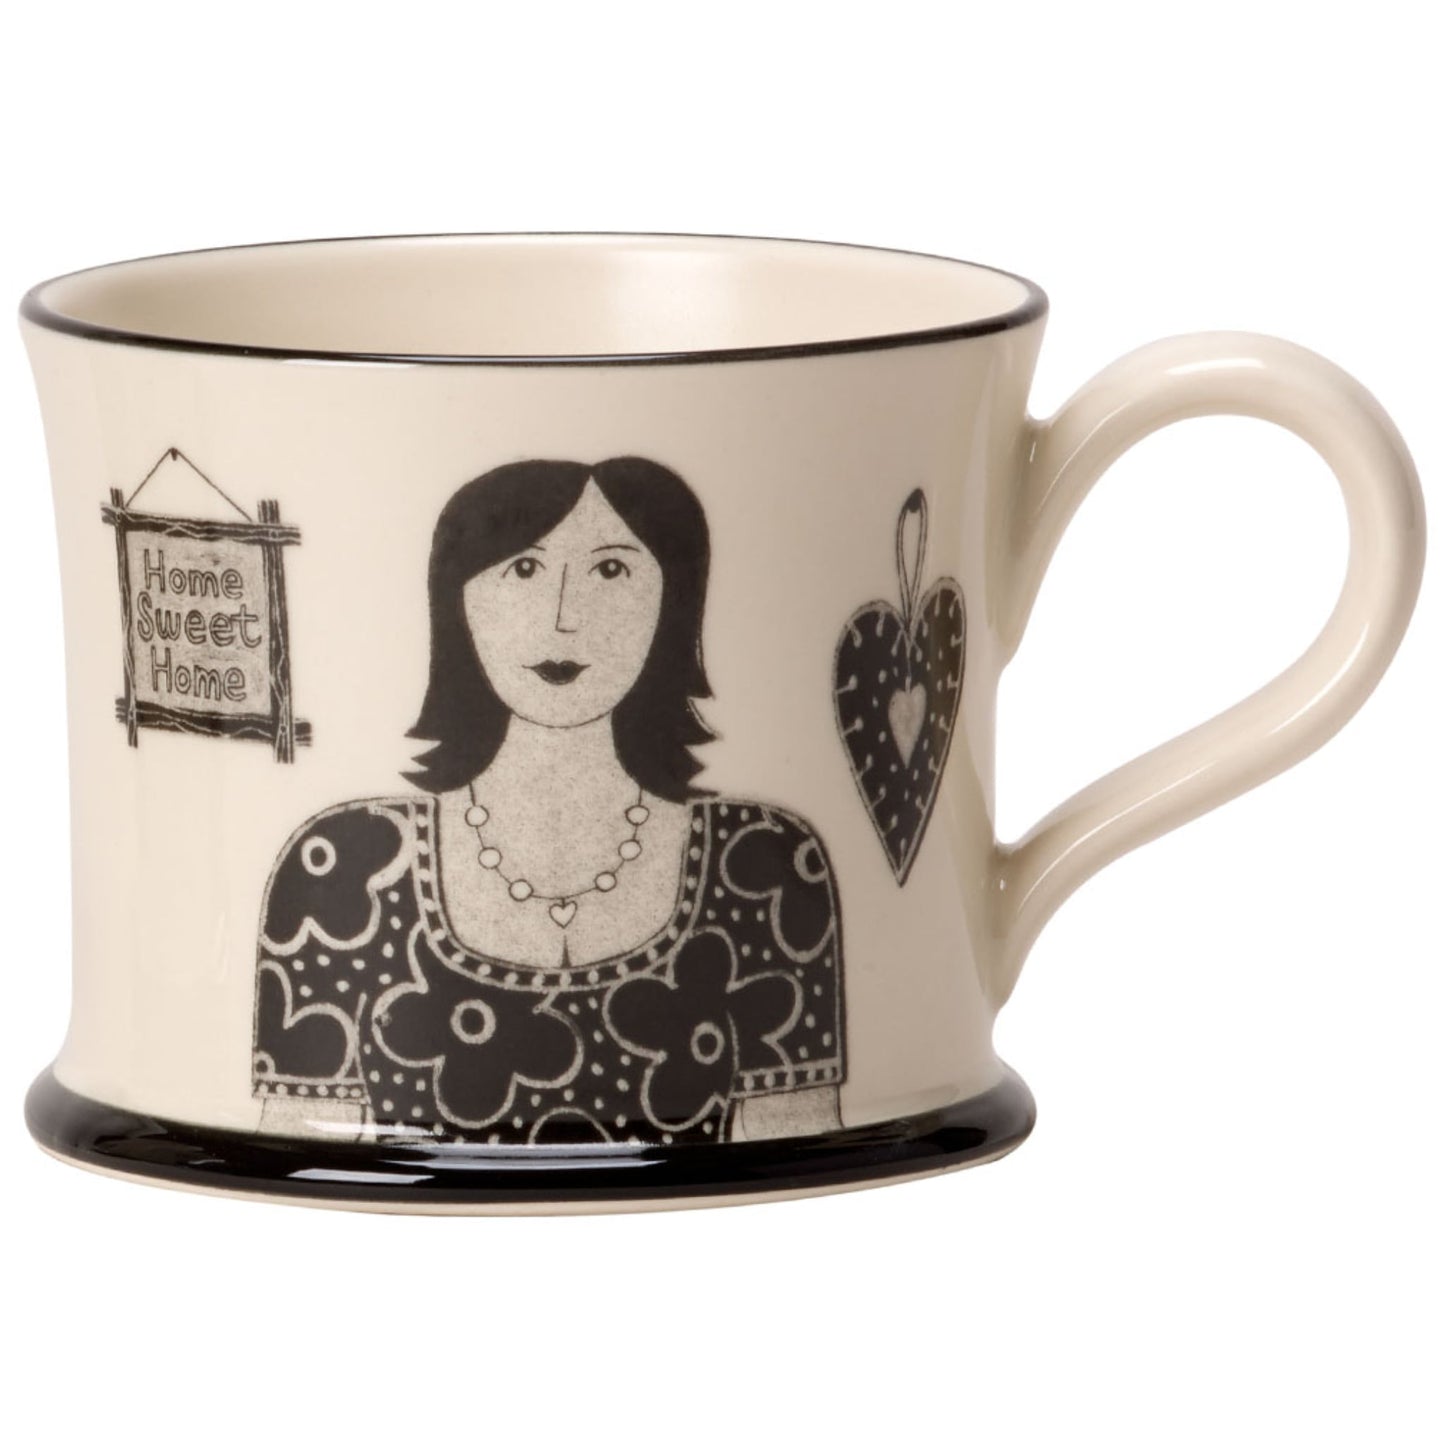 T'Best Mum in T'World Mug - The Great Yorkshire Shop